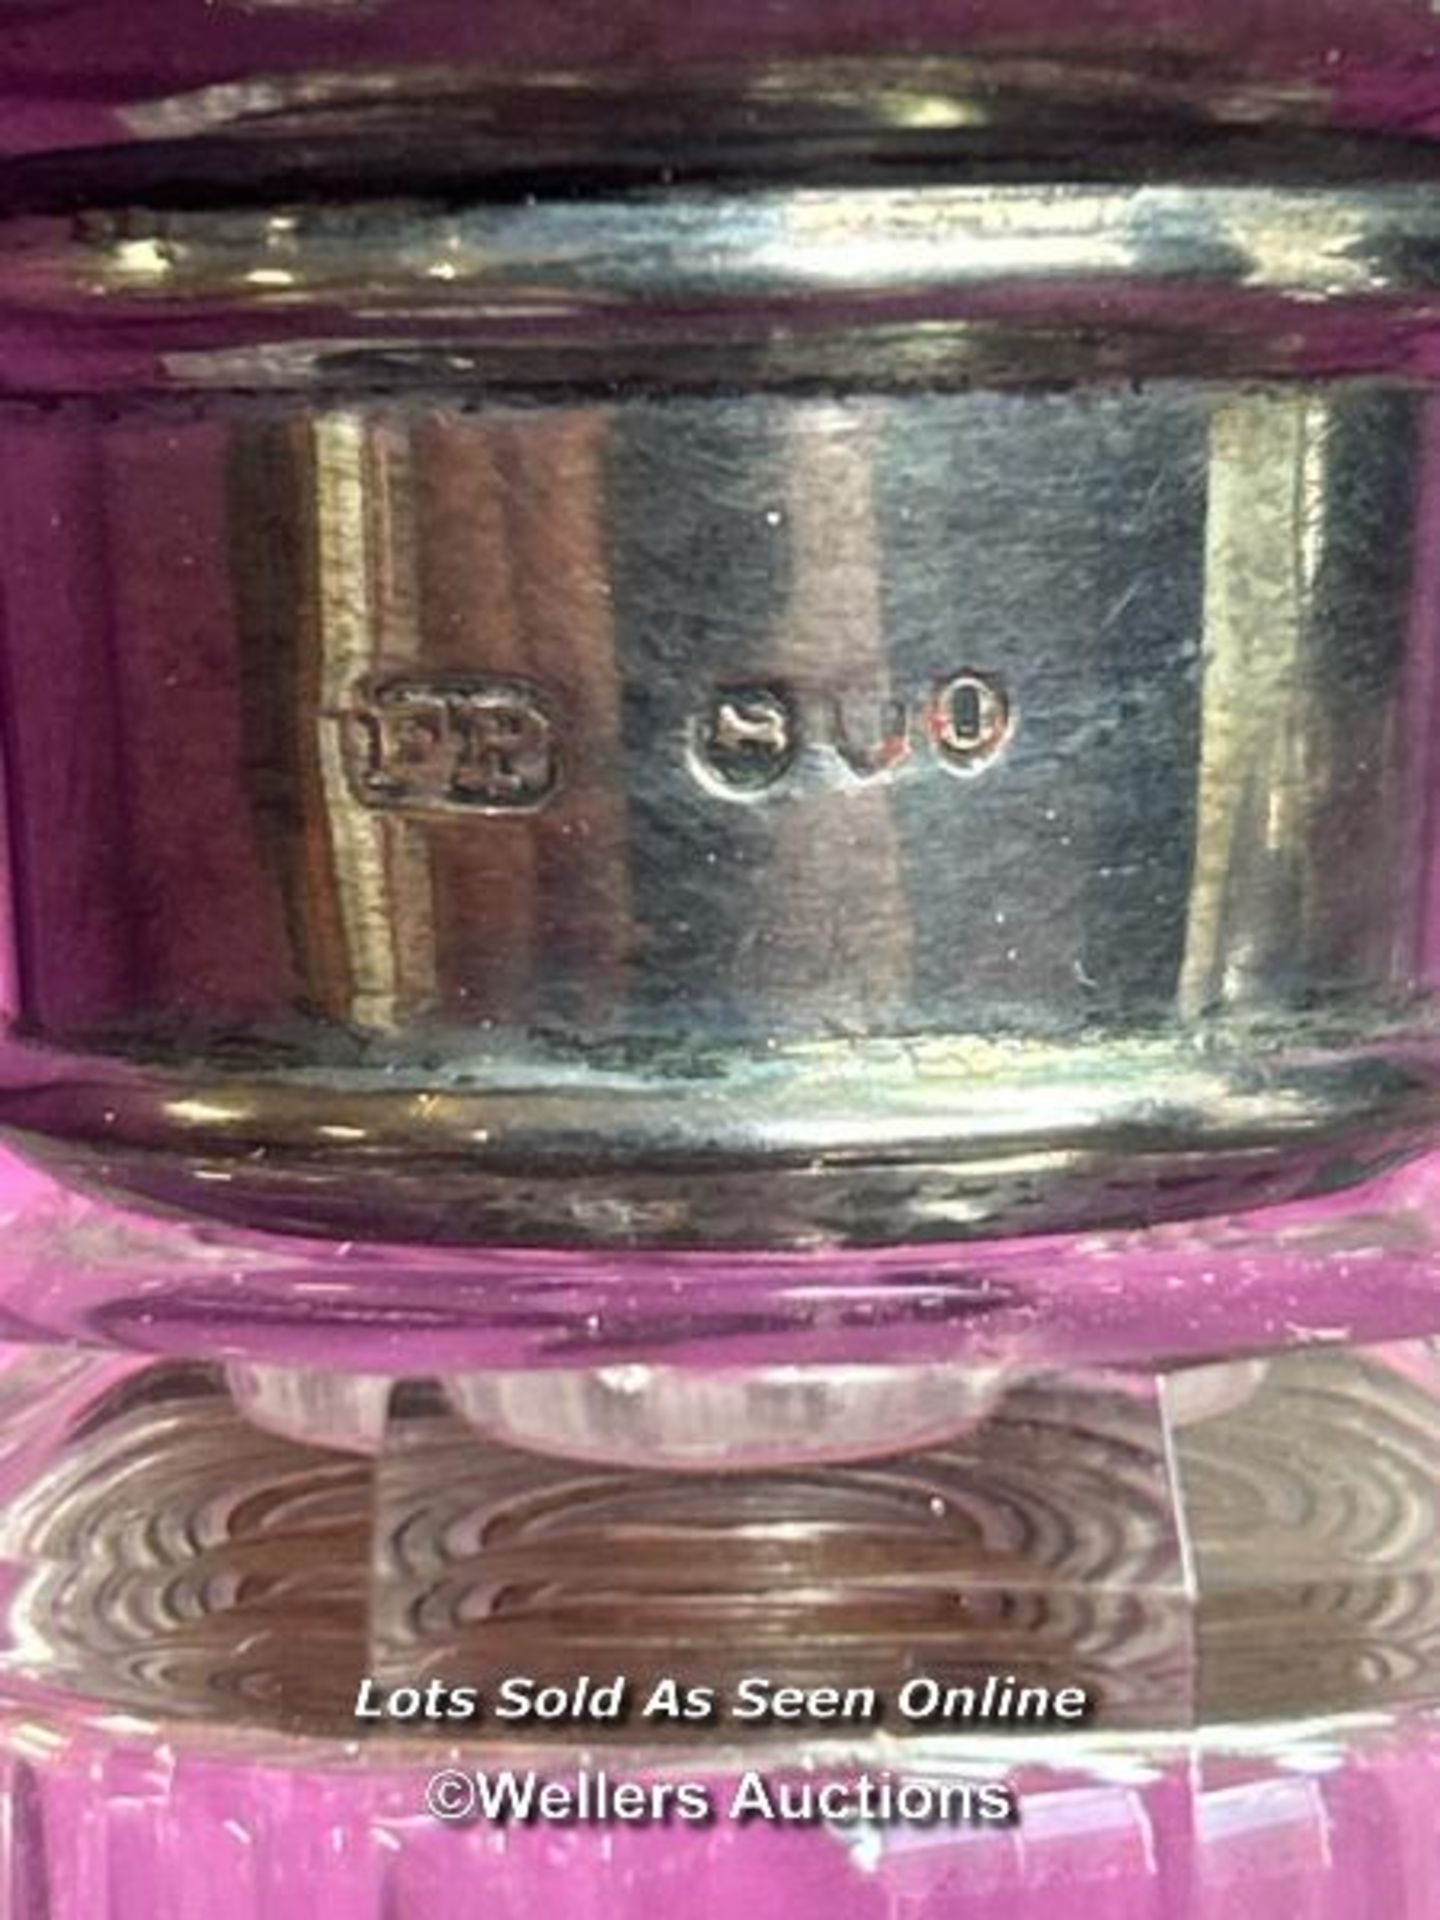 PAIR OF HALLMARKED SILVER TOPPED AND CUT GLASS BEVELLED JARS, HEIGHT 14CM, TOTAL SILVER WEIGHT 26GMS - Image 2 of 4